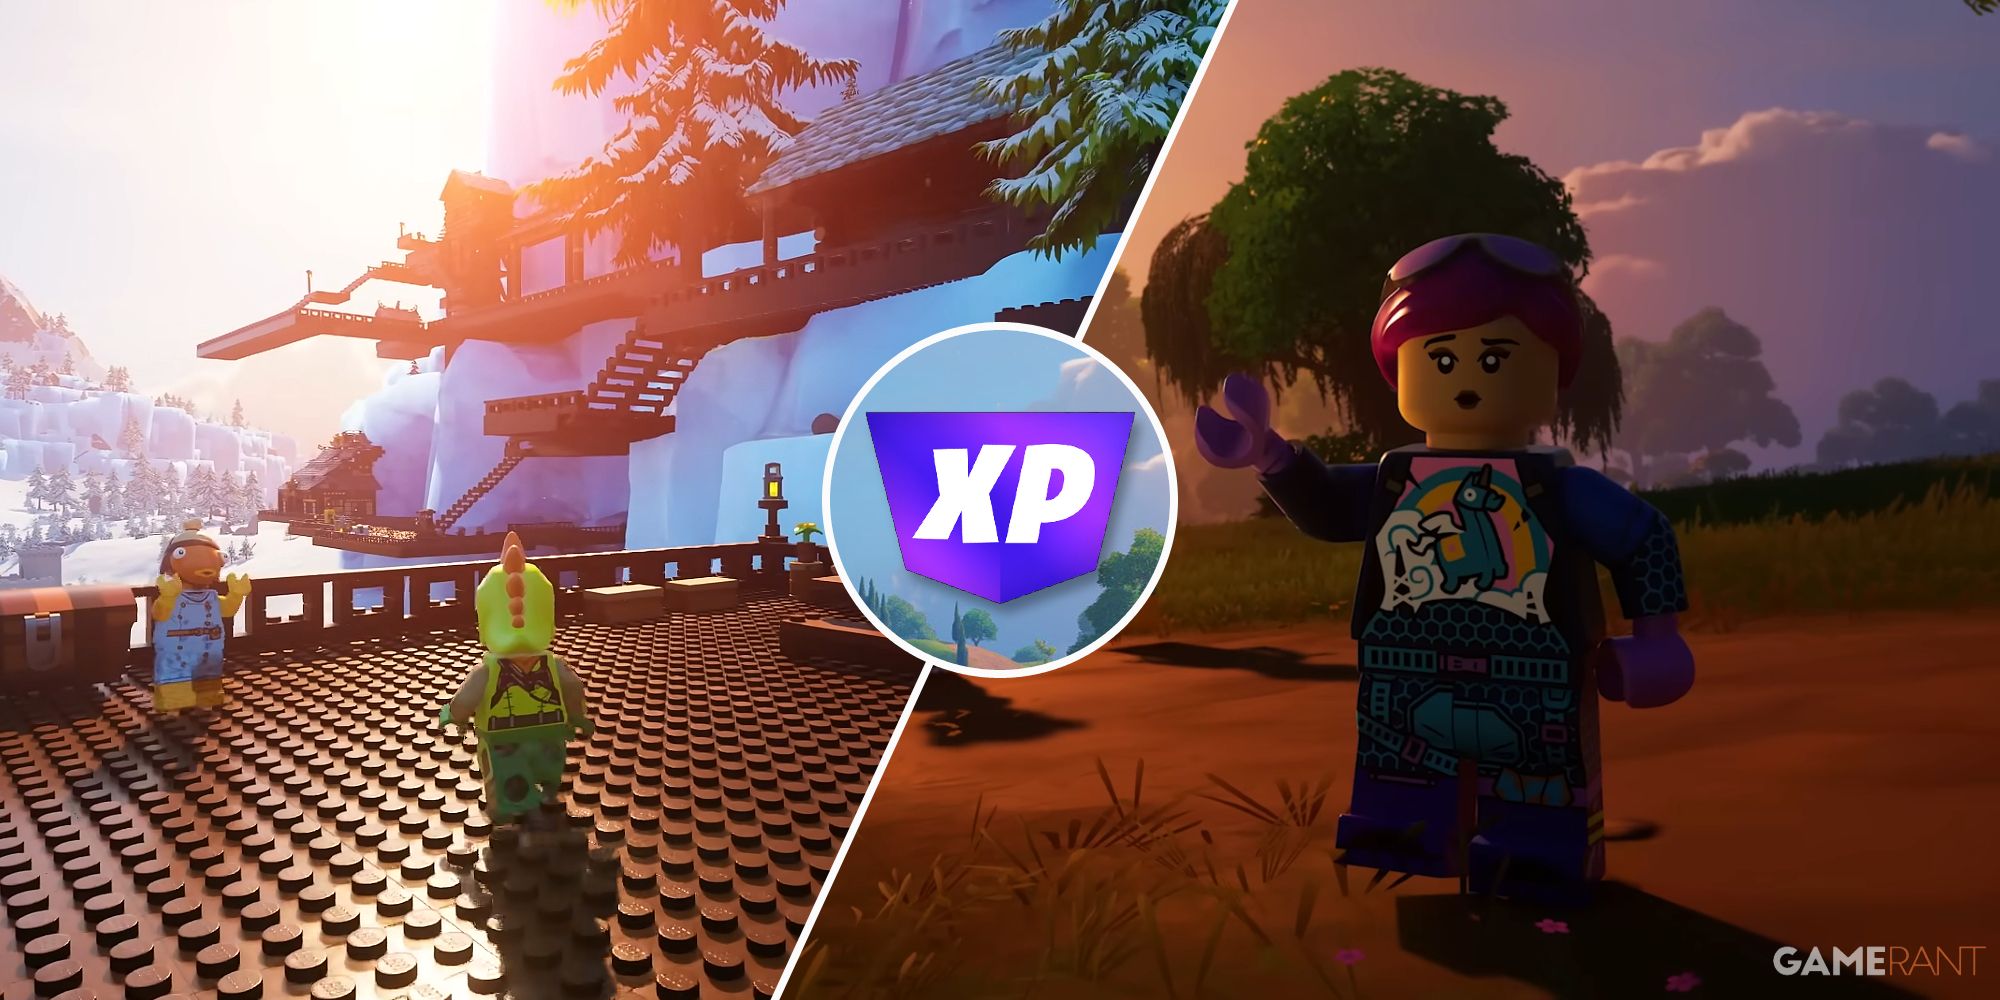 Lego Fortnite 5 Best Ways To Get XP - Updated Featured Image 